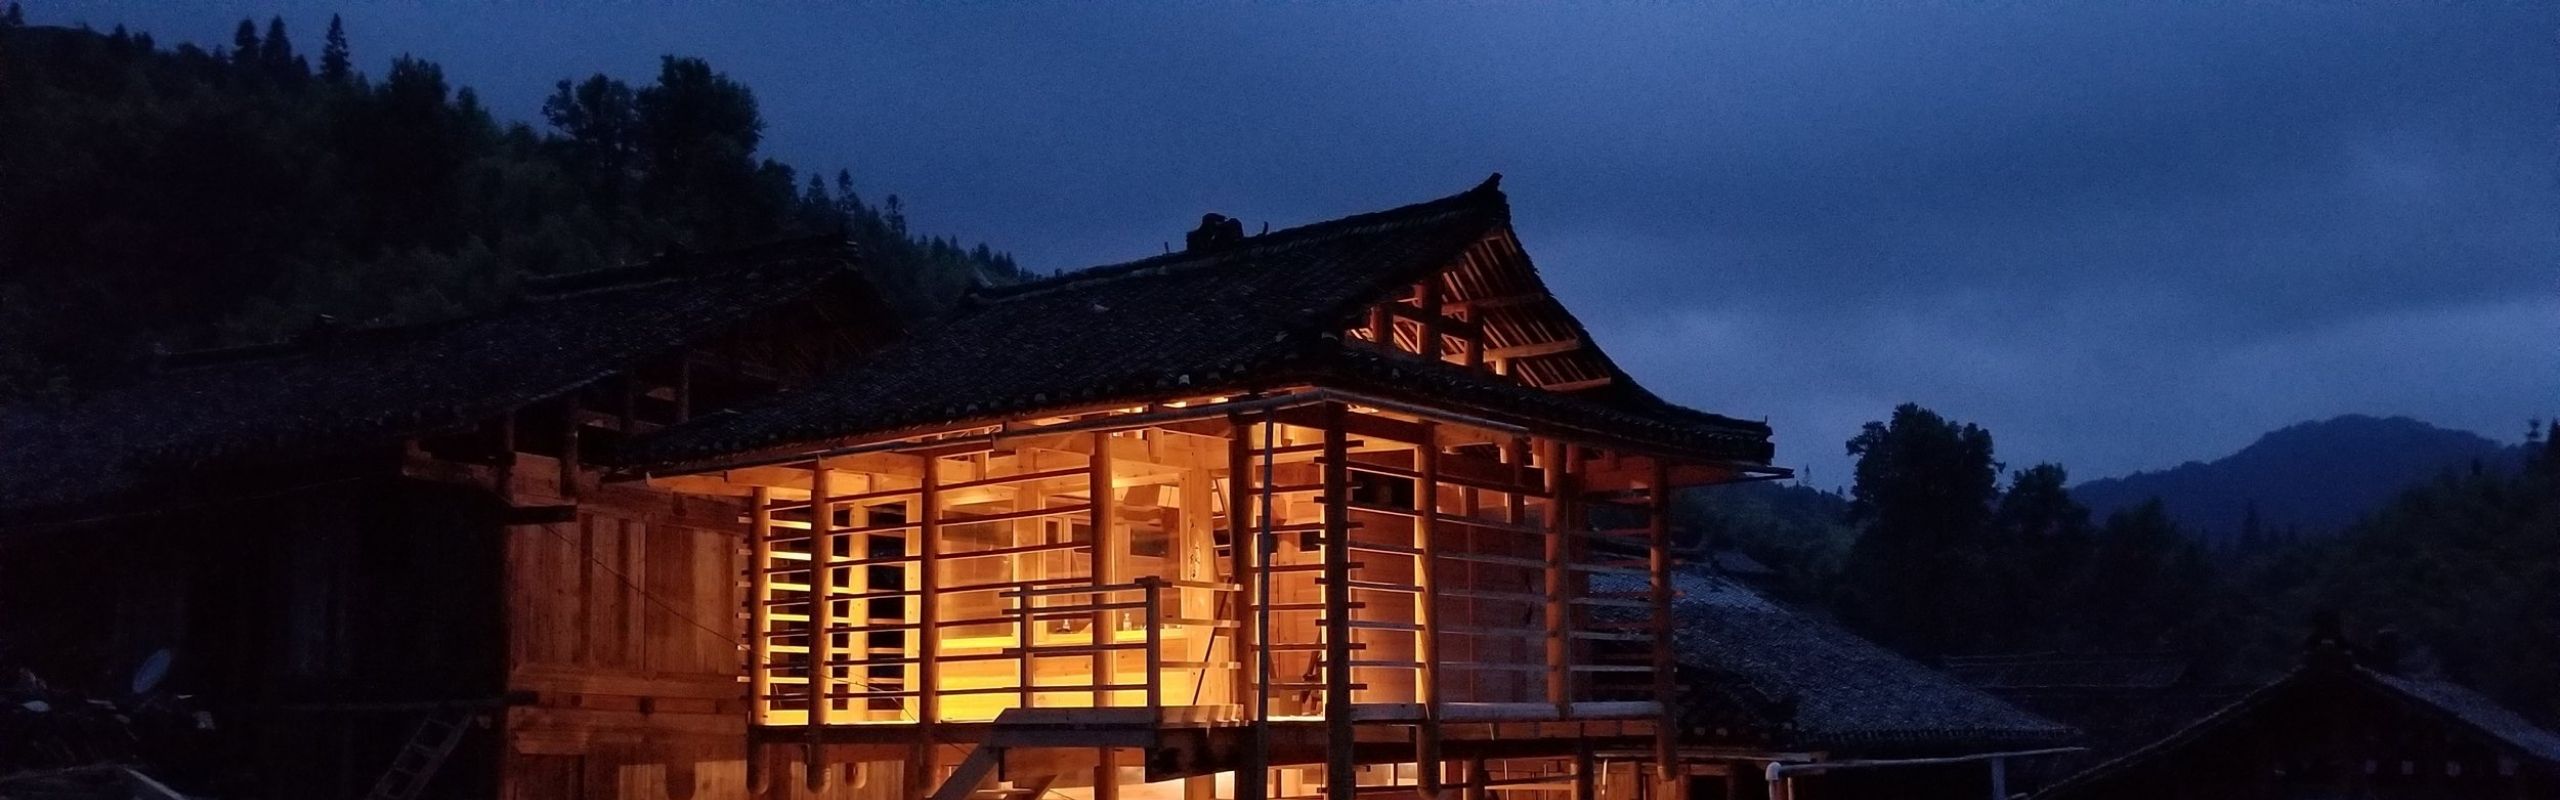 Wooden building with light shining through and night sky in background